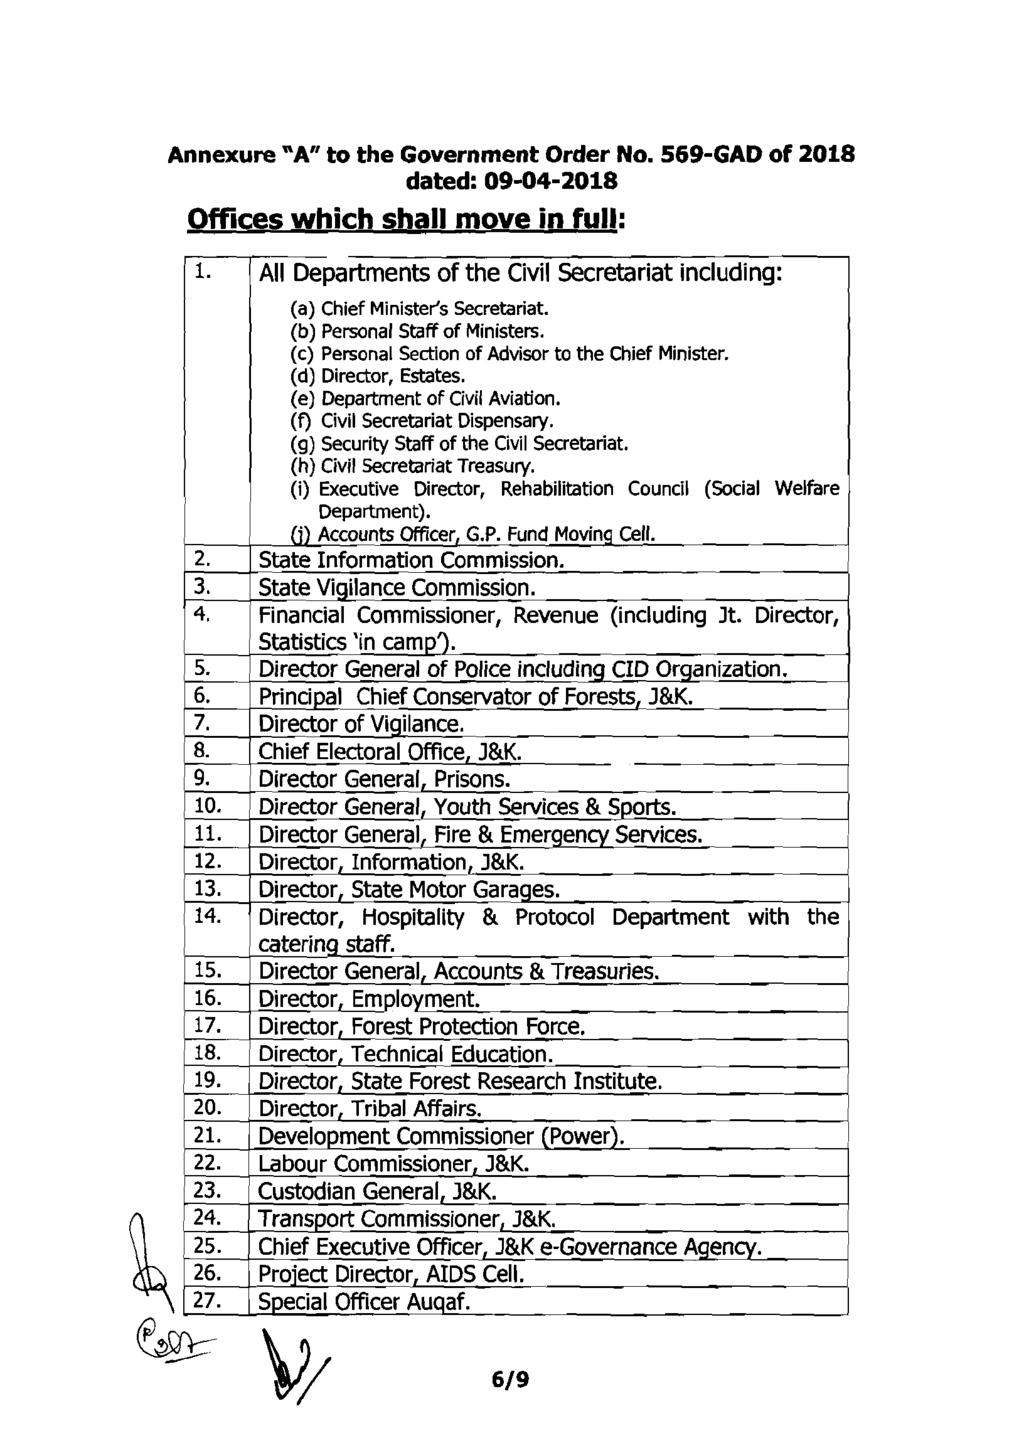 Annexure "A" to the Government Order No. 569-GAD of 2018 dated: 09-04-2018 Offices which shall move in full: 1. 2. All Departments of the Civil Secretariat including: (a) Chief Minister's Secretariat.